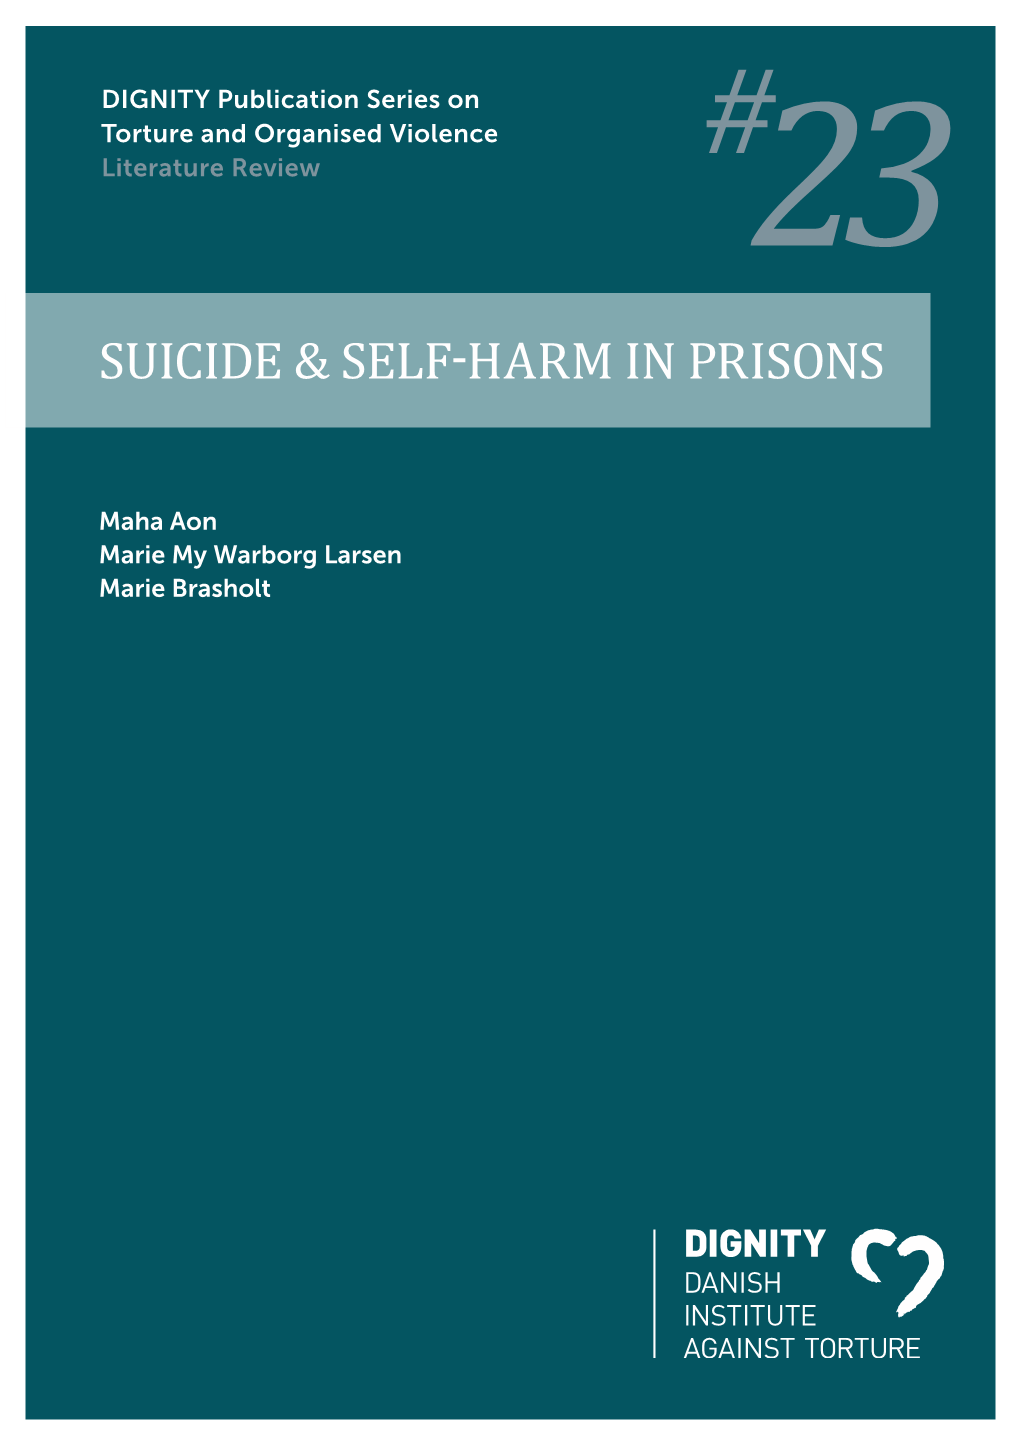 Suicide & Self-Harm in Prisons